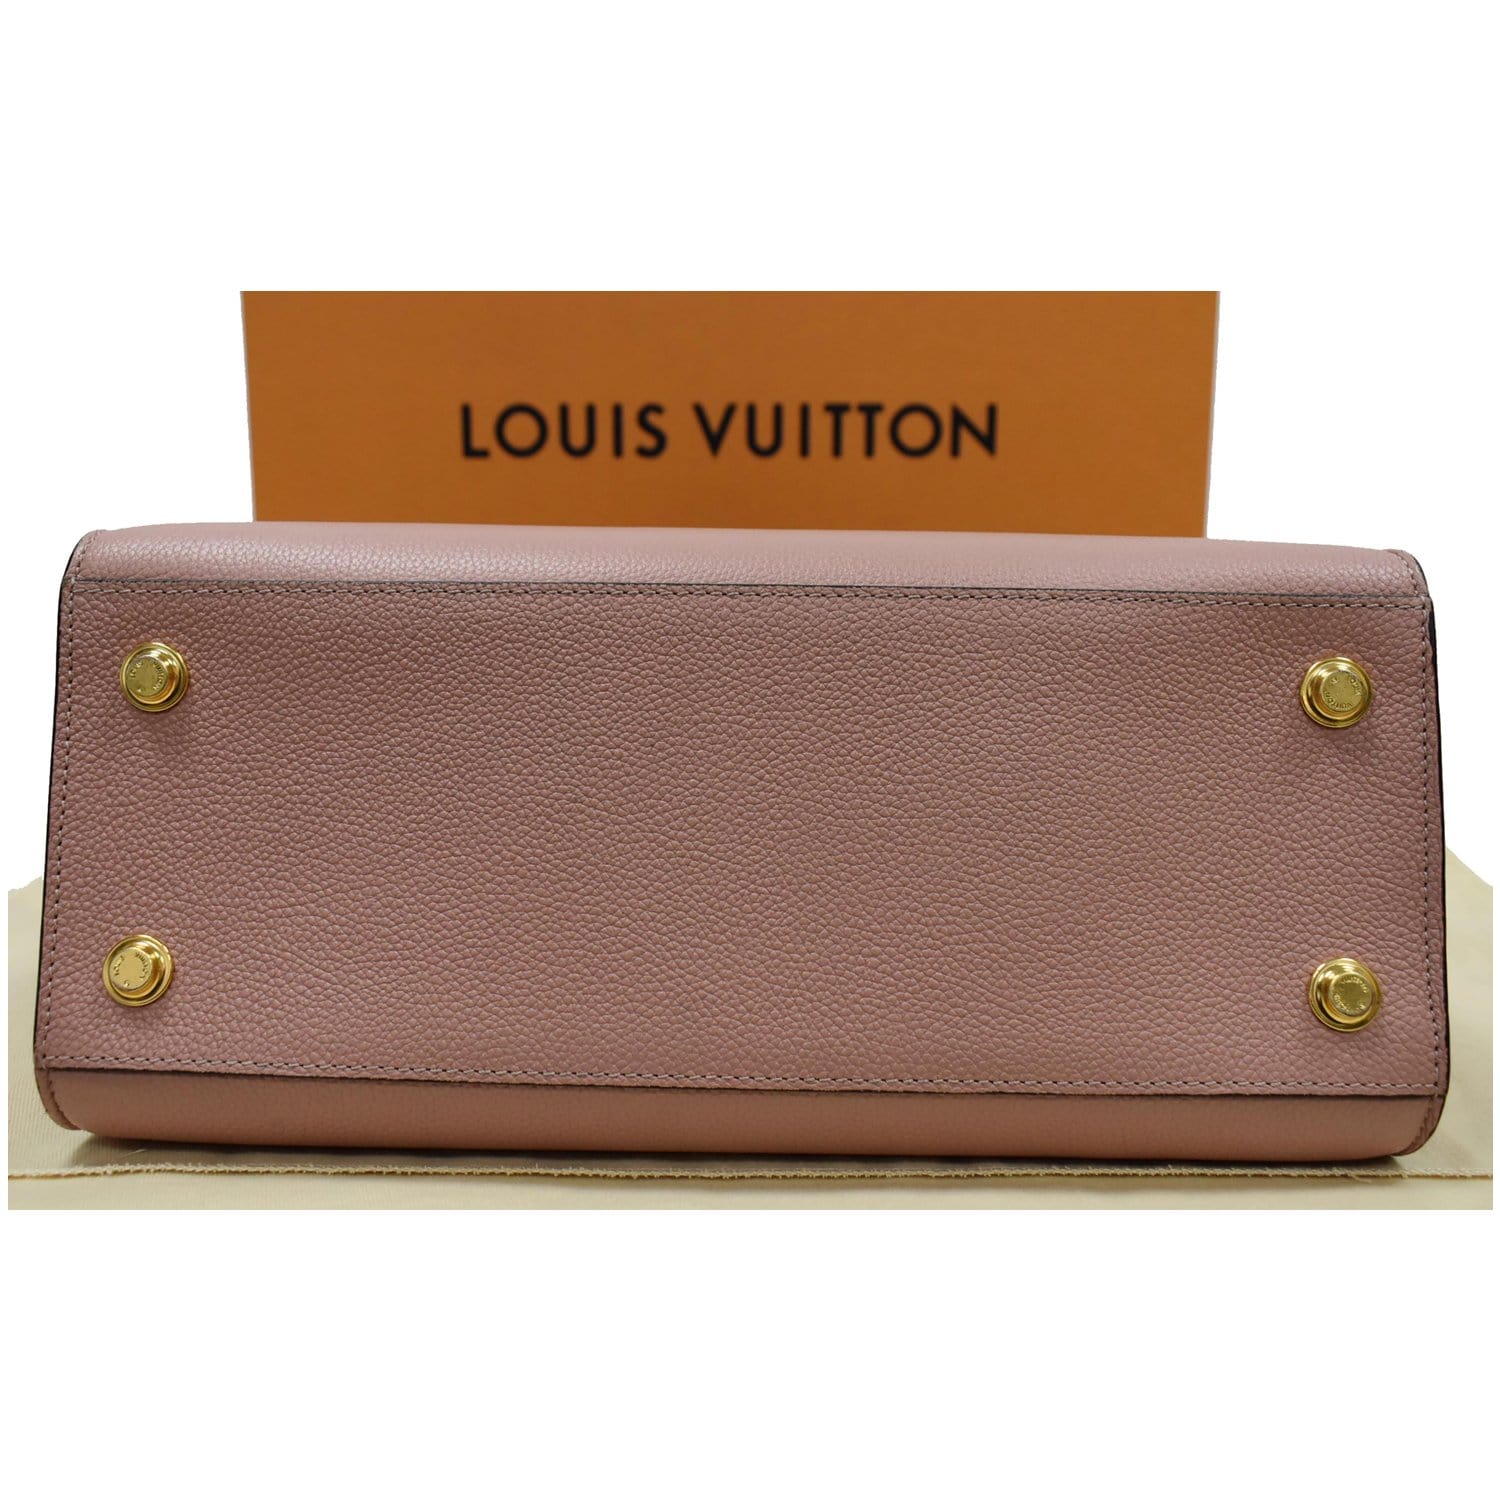 LOUIS VUITTON City Steamer MM Hand Bag Leather 2way Pink M53019 LV